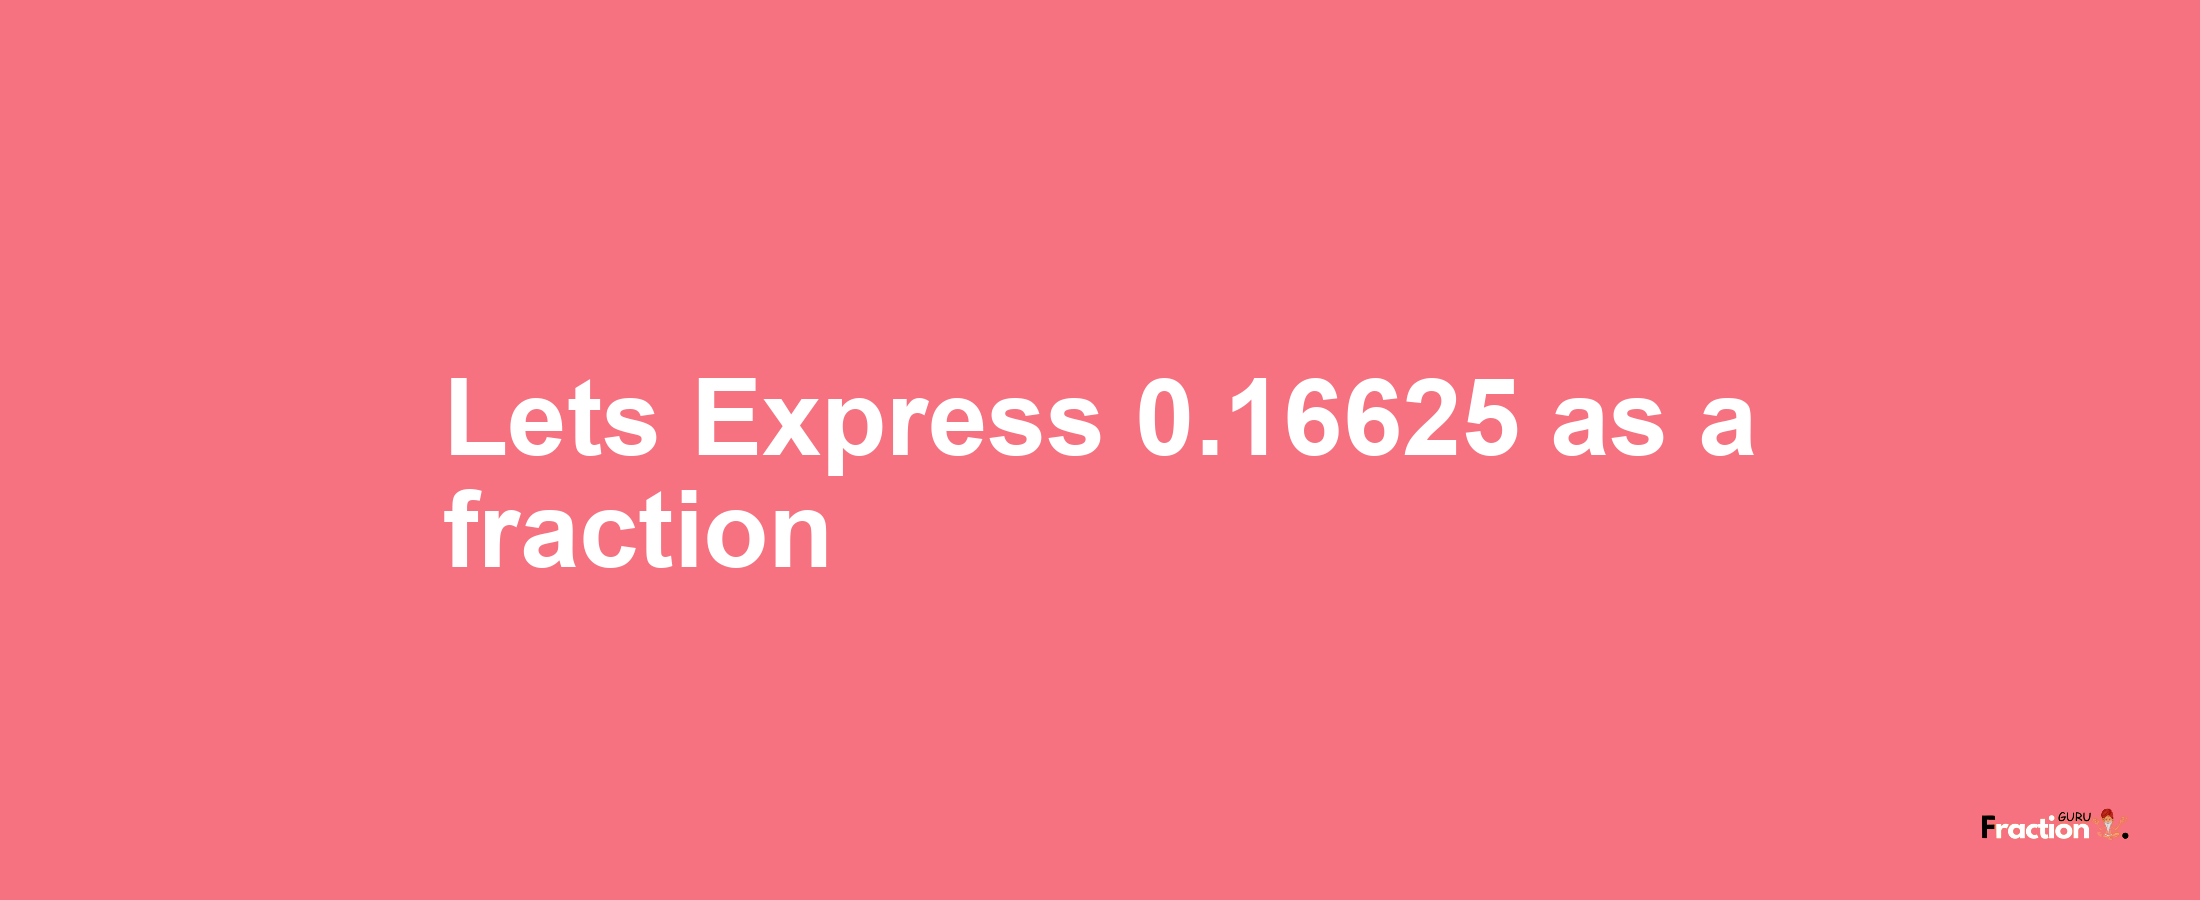 Lets Express 0.16625 as afraction